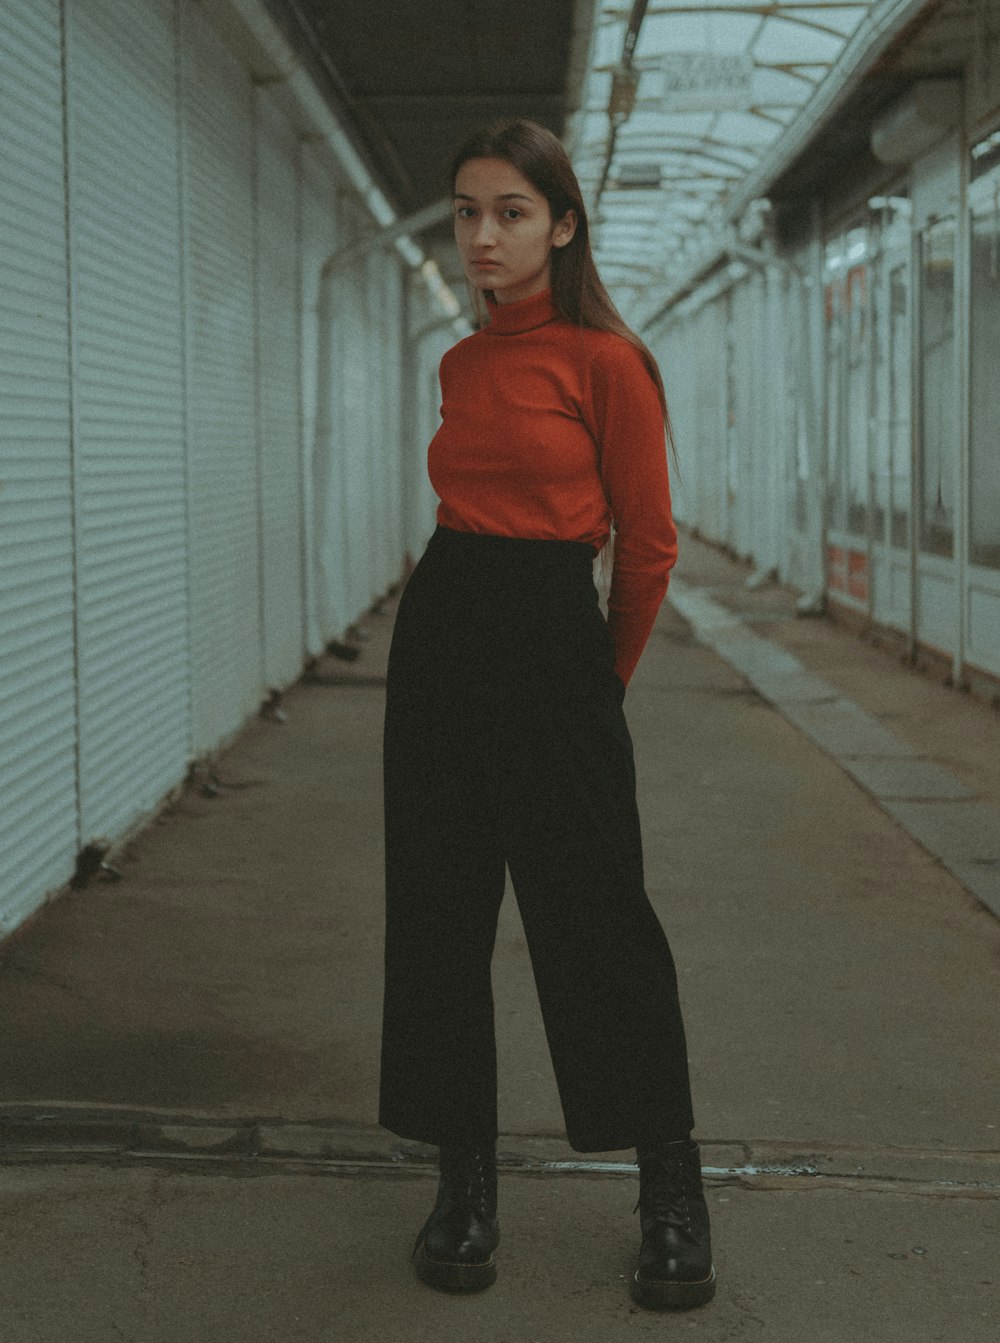 a woman in a red shirt and black pants